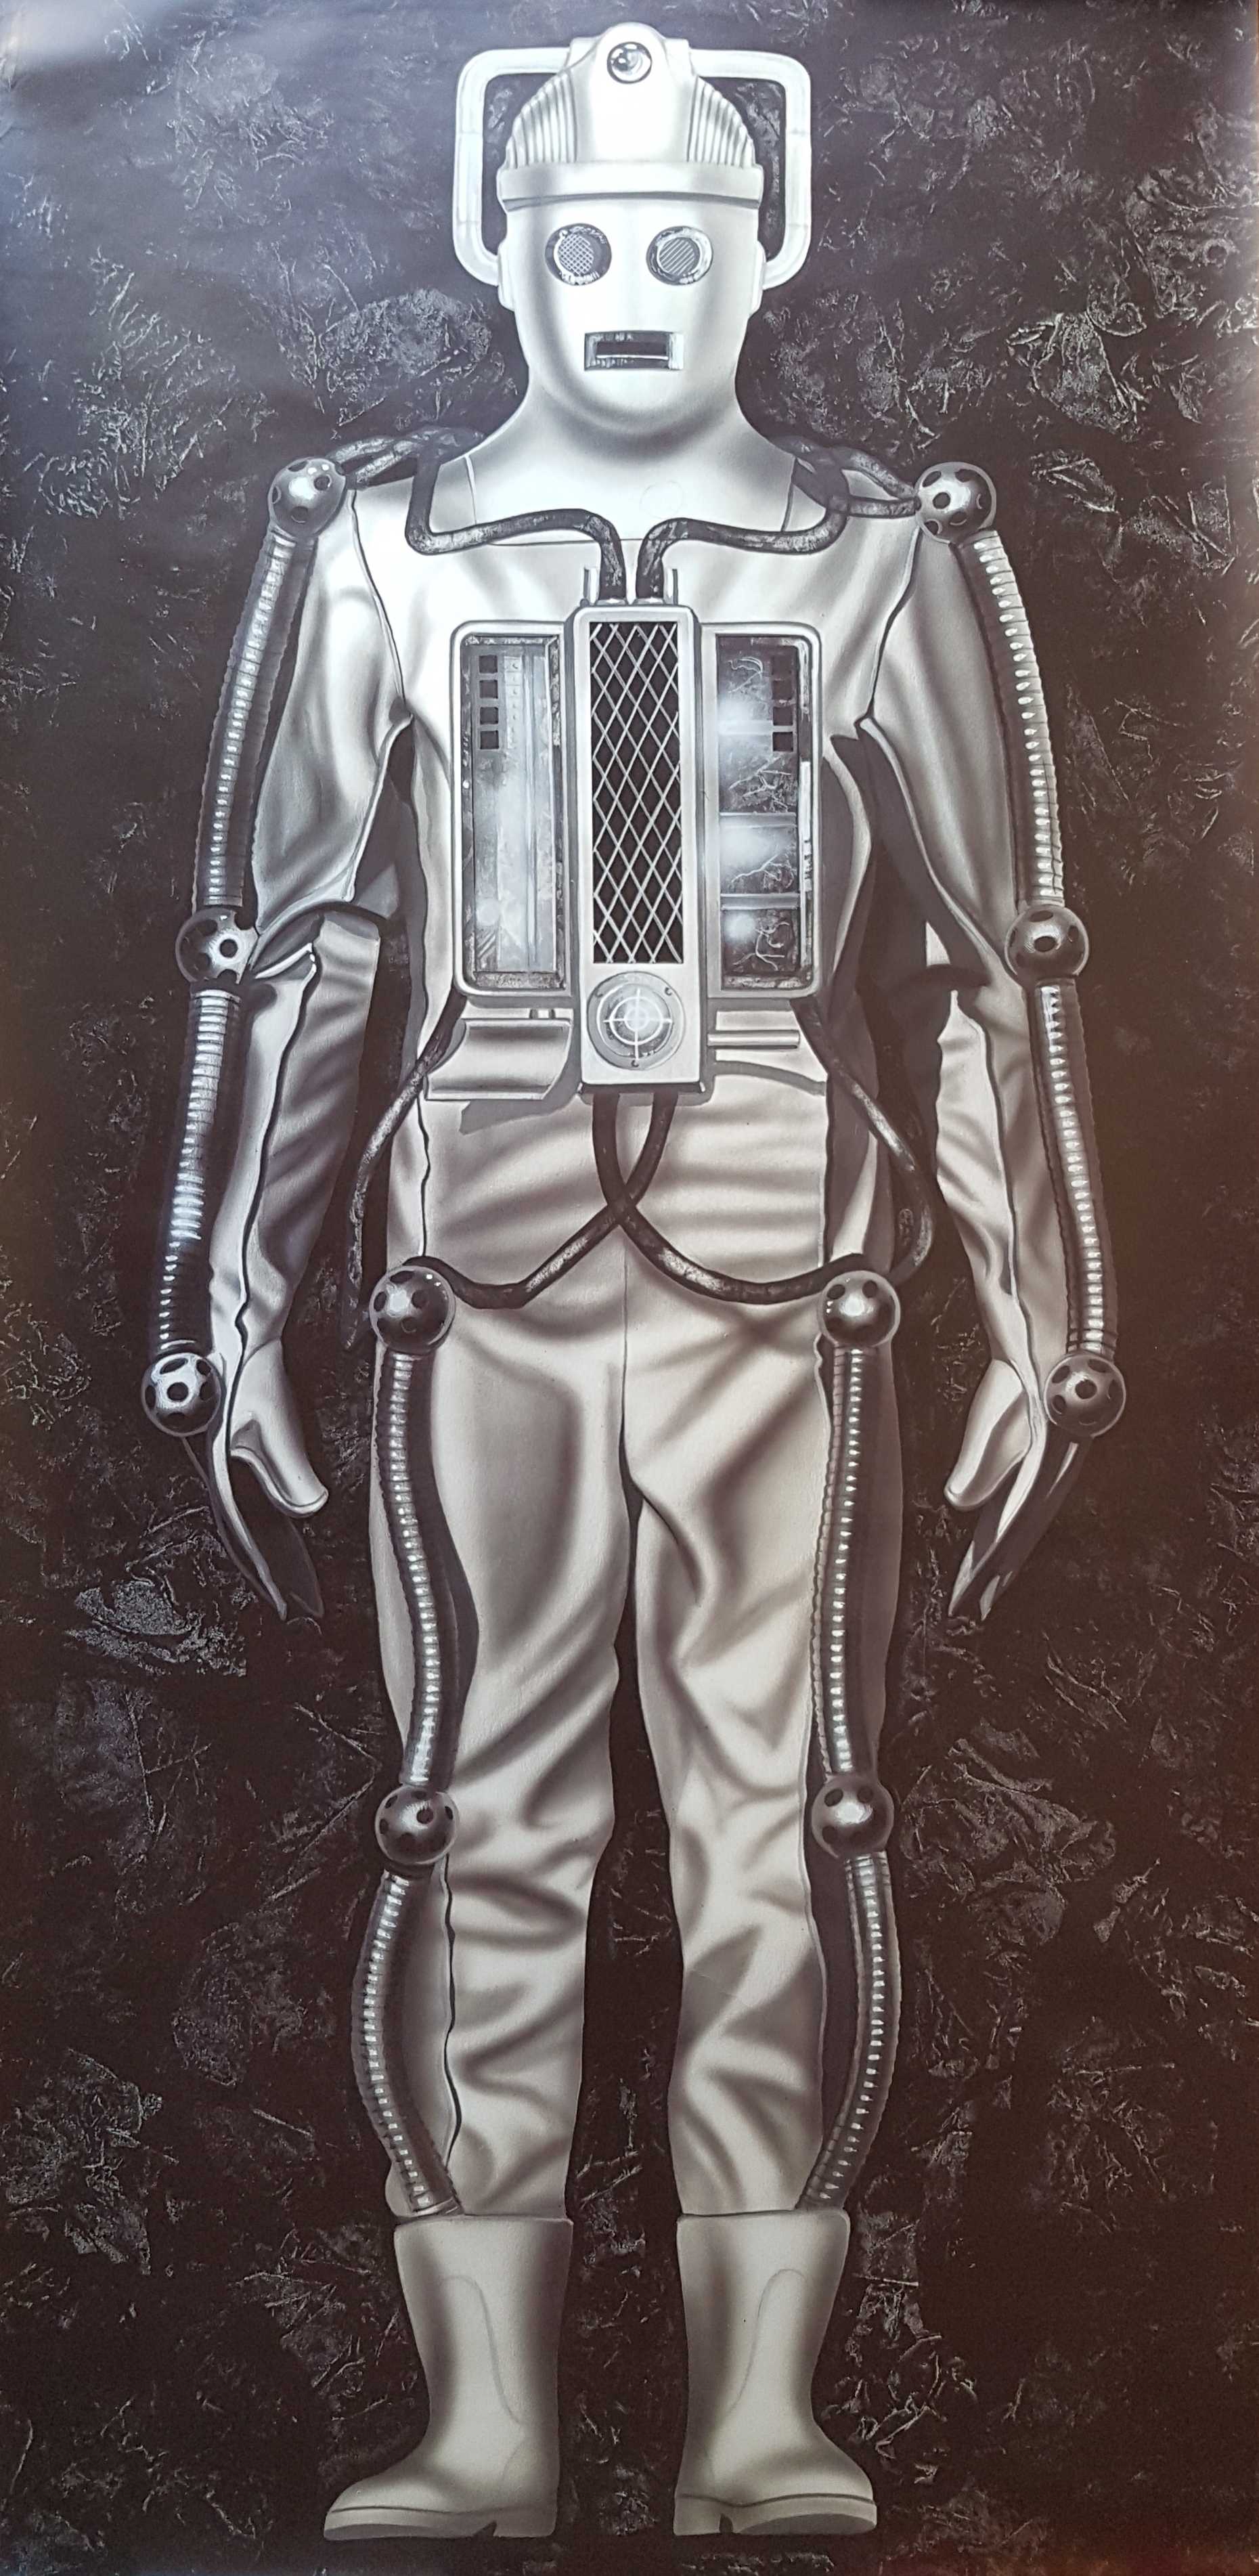 Picture of Poster-DW-Cyber2 Doctor Who - Cyberman by artist Unknown from the BBC records and Tapes library